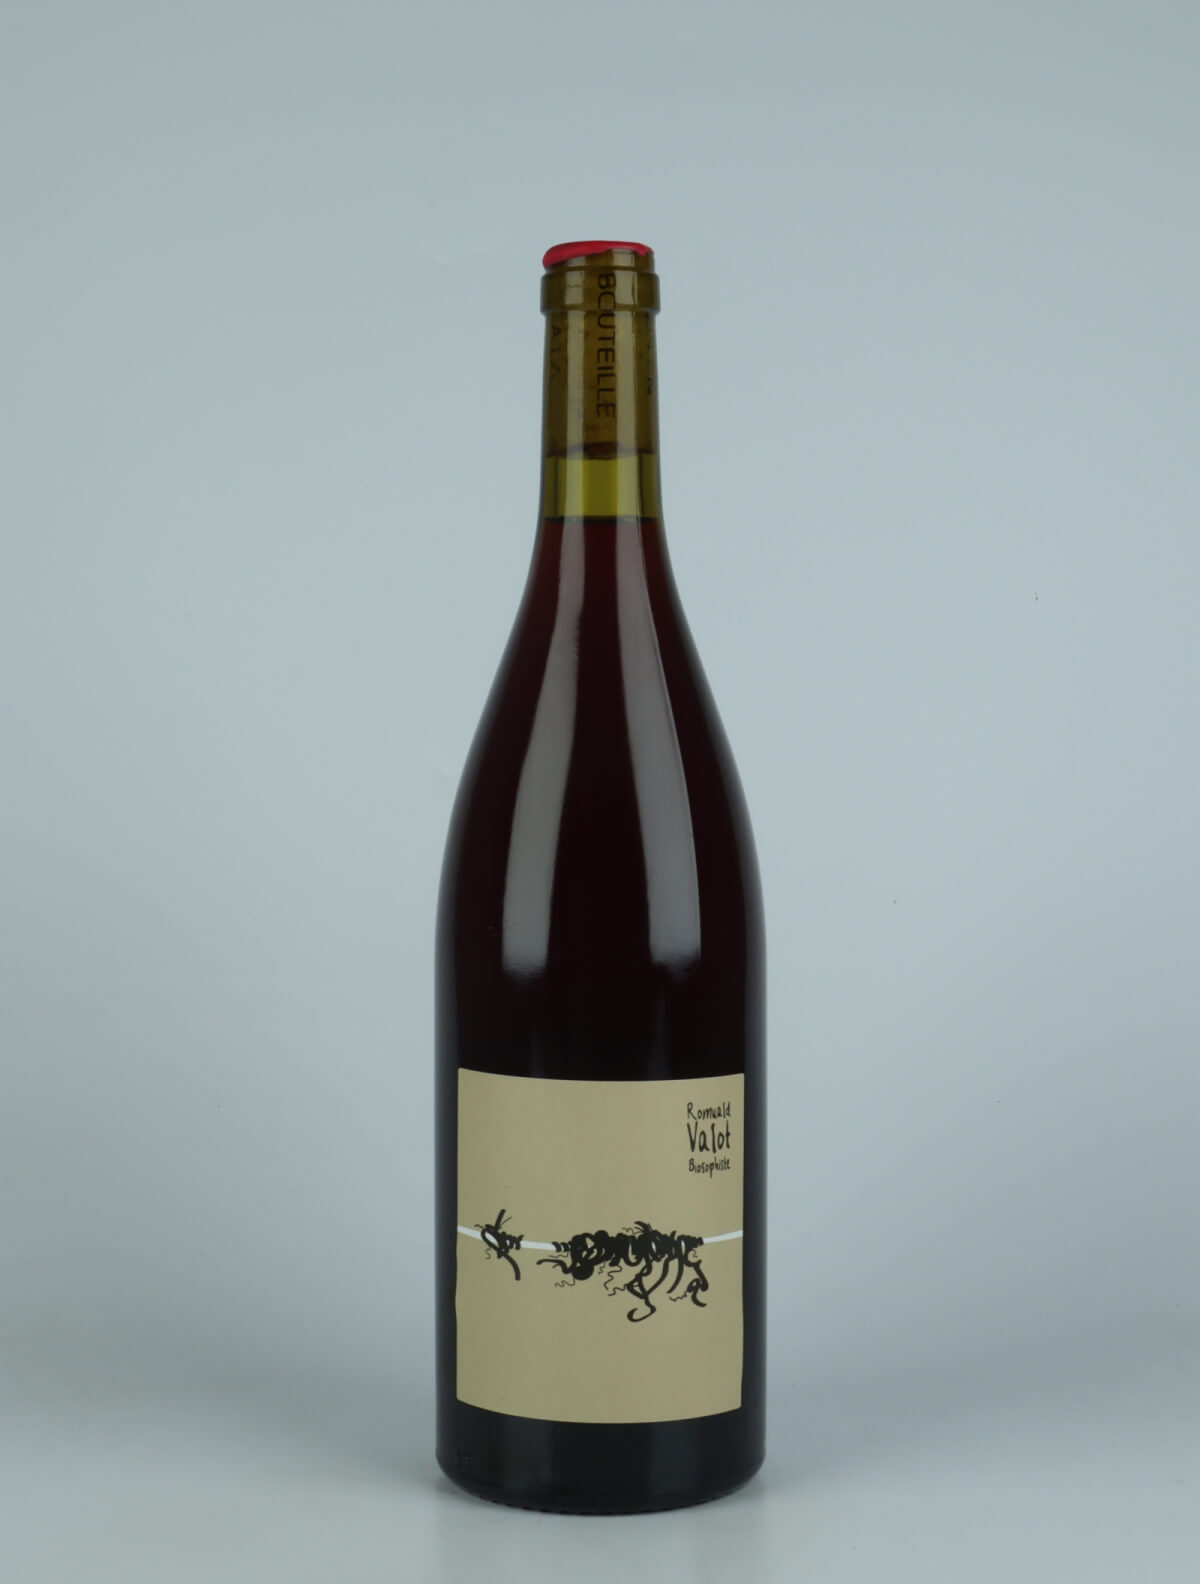 A bottle 2022 Cuvée 21550 - Infusion de Pinot Noir Red wine from Romuald Valot, Beaujolais in France